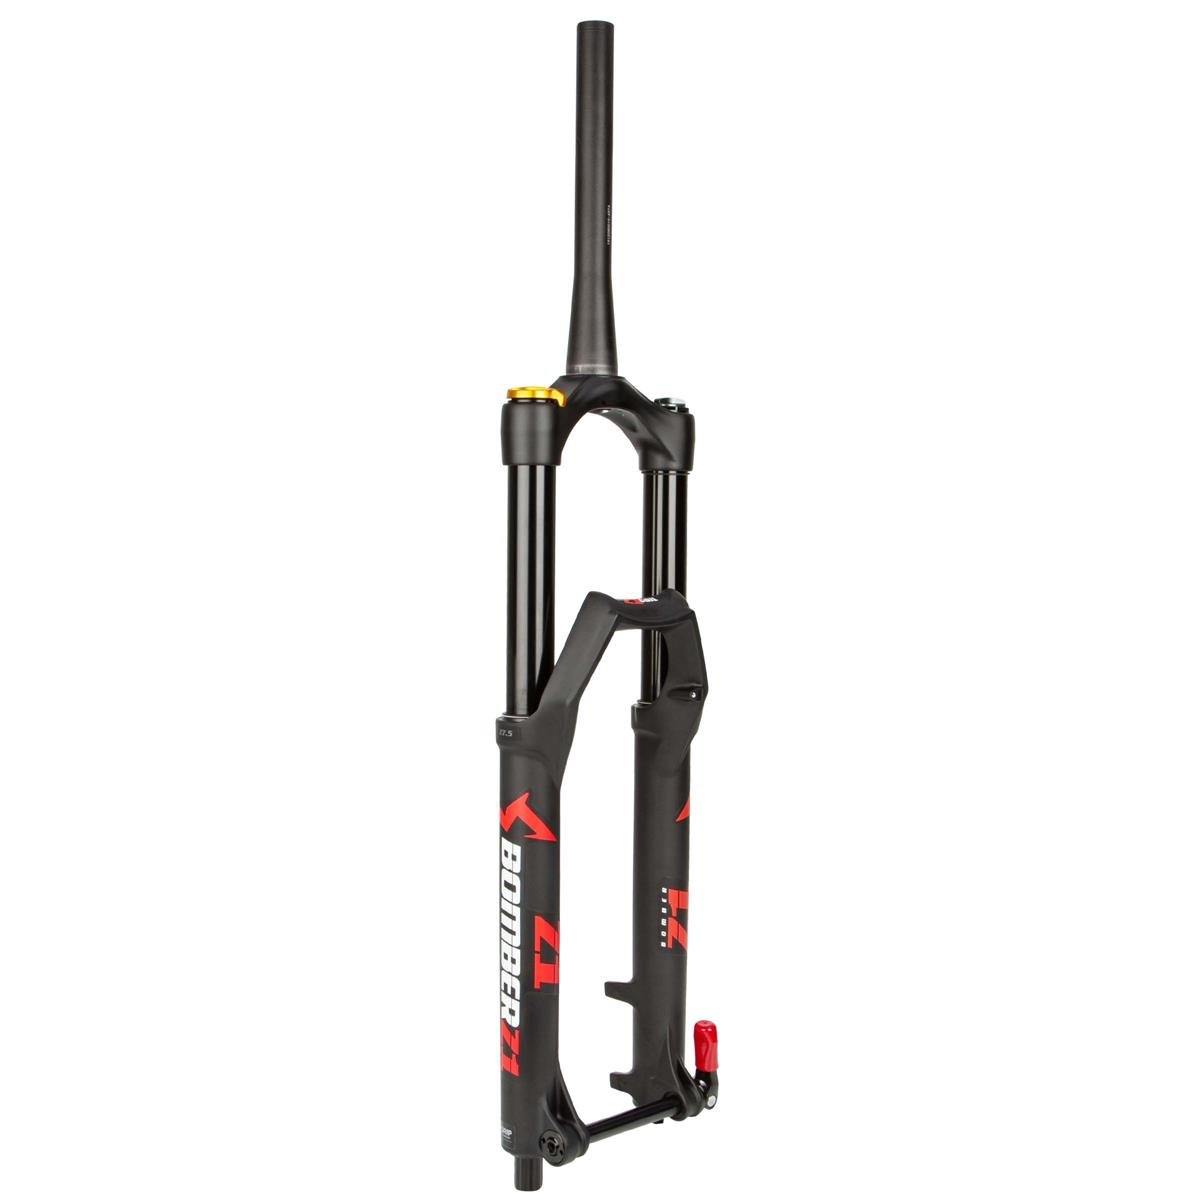 Marzocchi Suspension Fork Bomber Z1 Coil 27.5 Inches, 15x110 mm, GRIP, 44 mm Offset, 170 mm